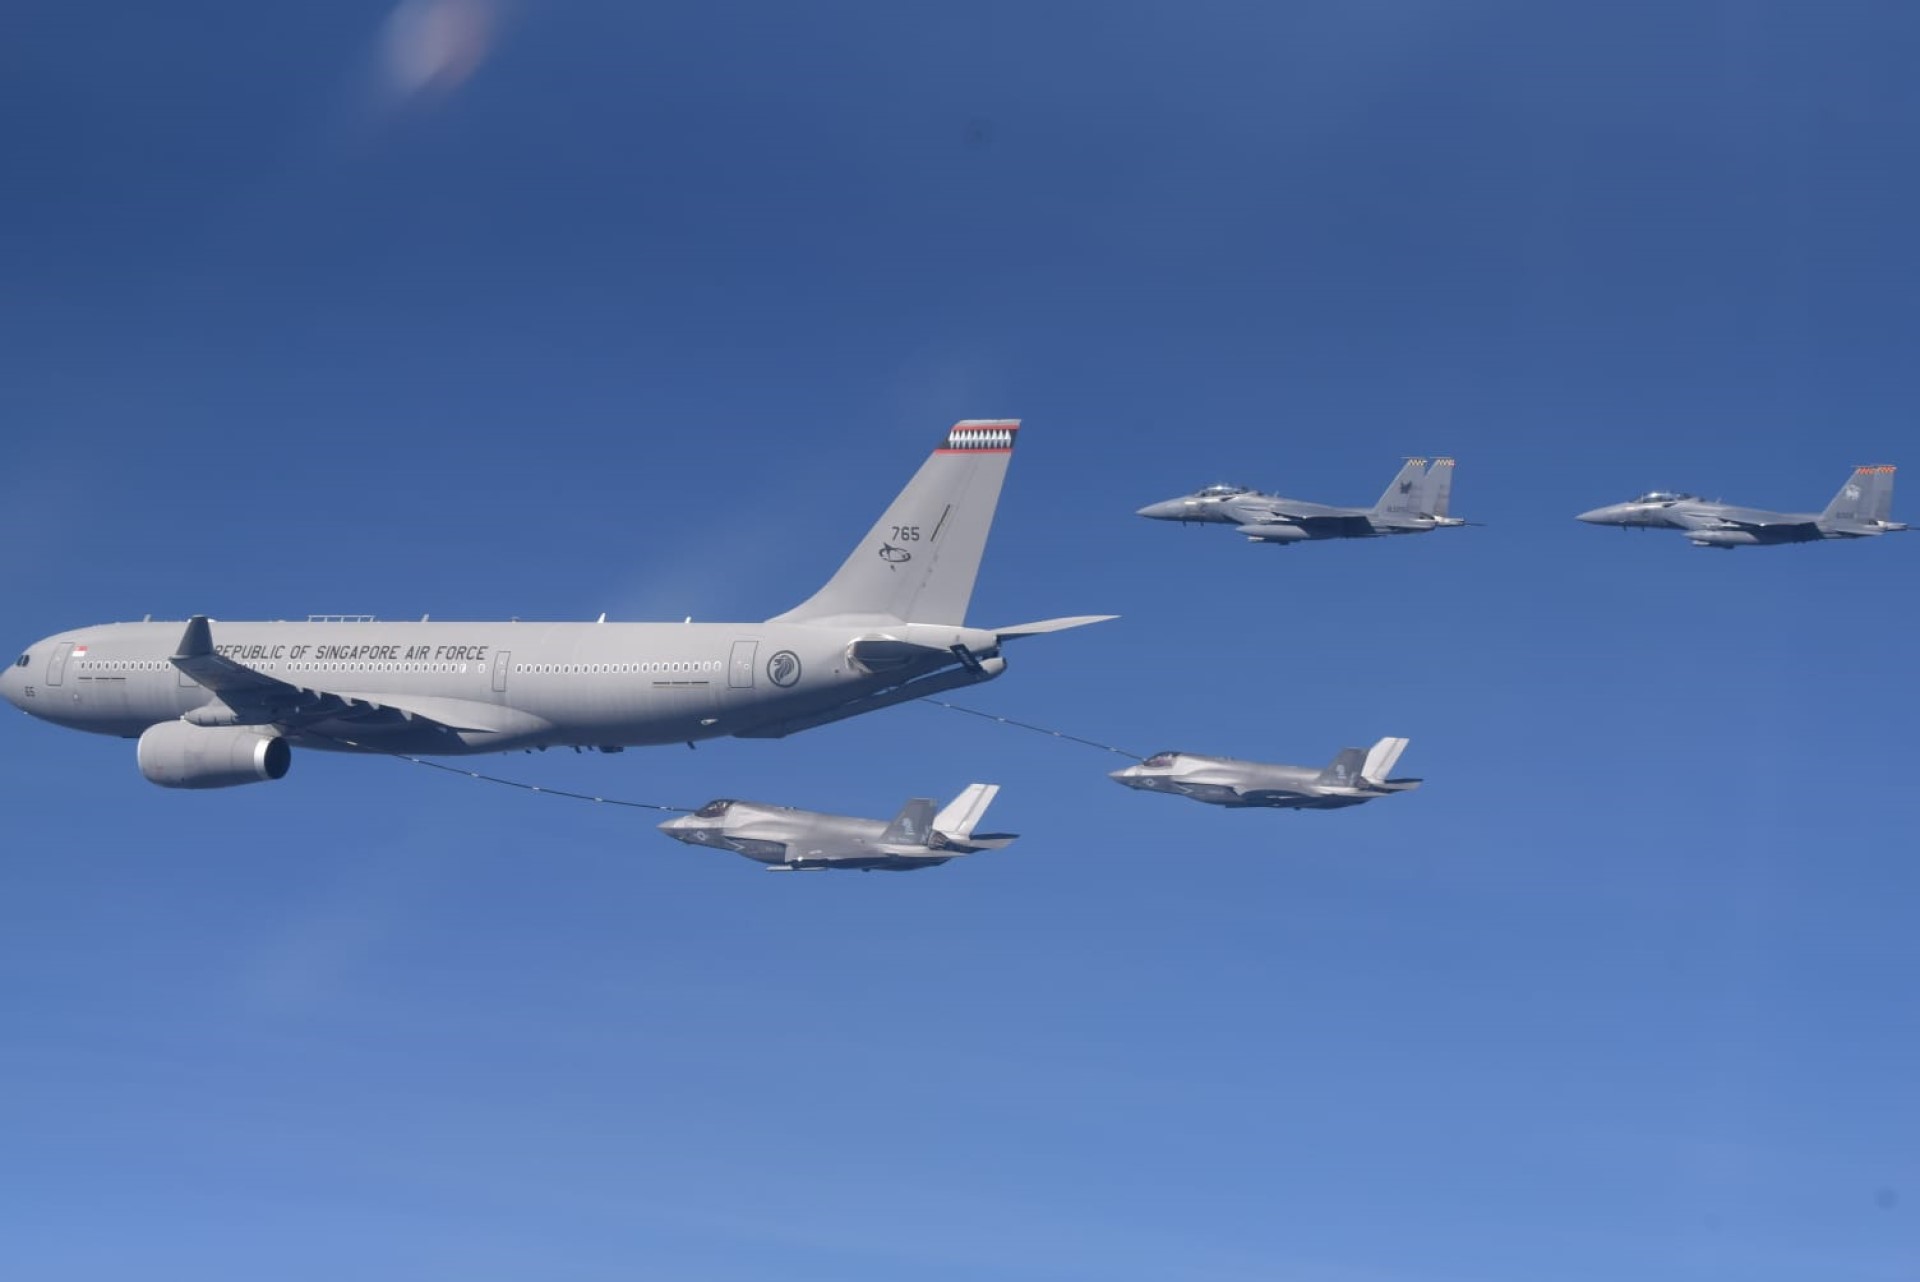 The Republic of Singapore Air Force's (RSAF) Multi-Role Tanker Transport conducting air-to-air refueling with two of the United States Marine Corps' F-35B fighter aircraft.